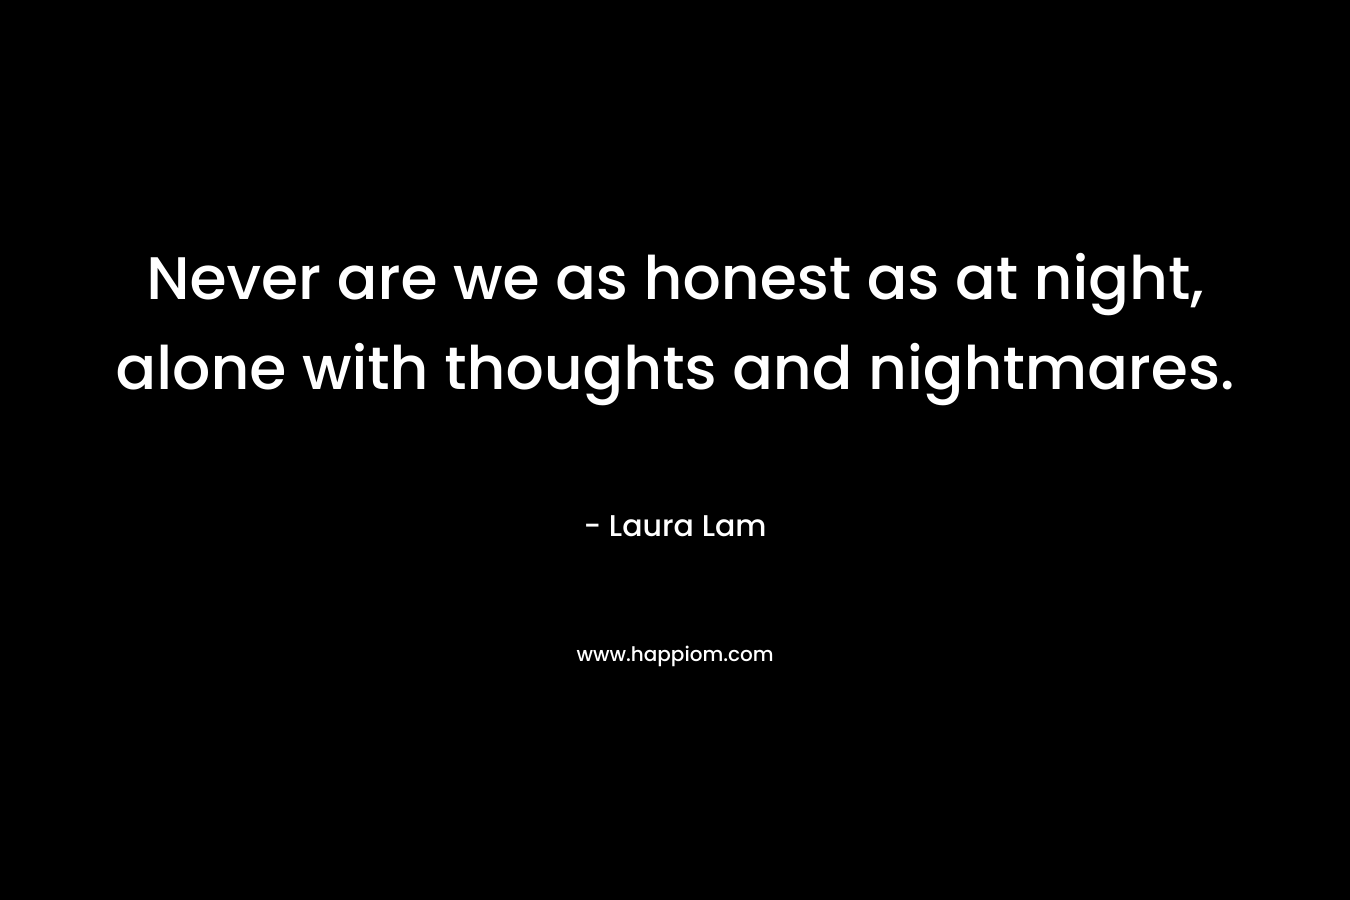 Never are we as honest as at night, alone with thoughts and nightmares.